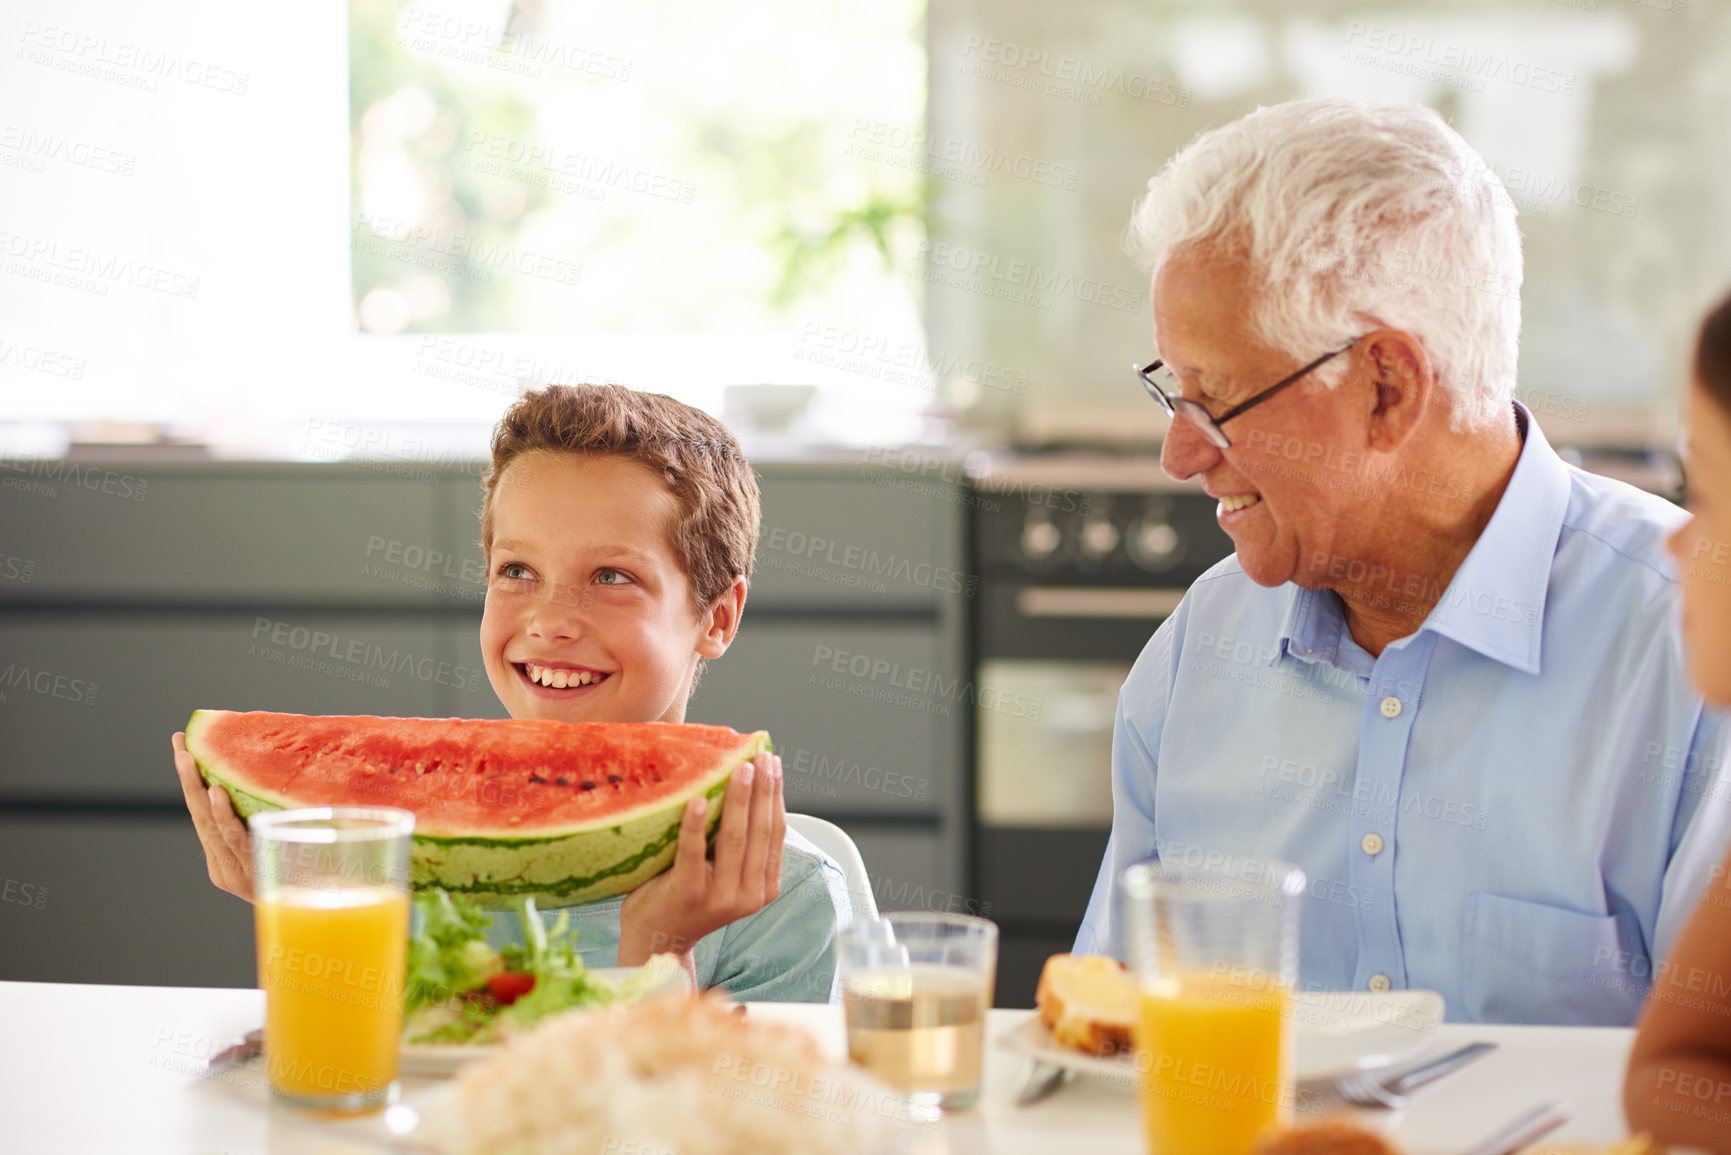 Buy stock photo Shot of a little boy holding a large slice of watermelon while his family look on